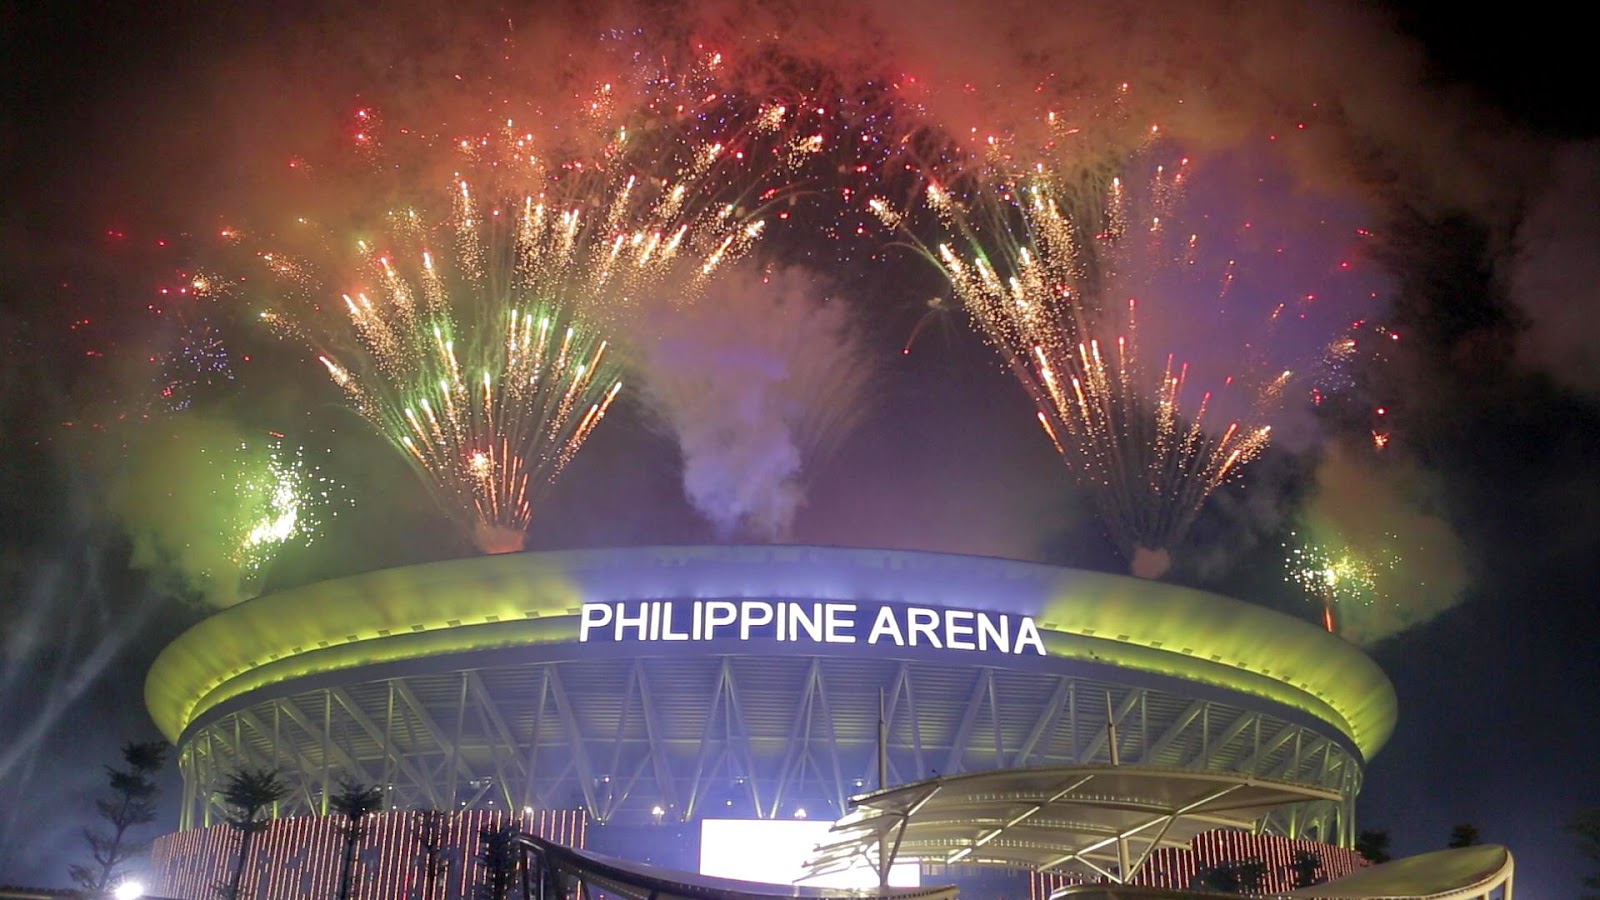 PHILIPPINE ARENA TO HOUSE TWO OF THE BIGGEST UPCOMING CONCERTS IN THE ...